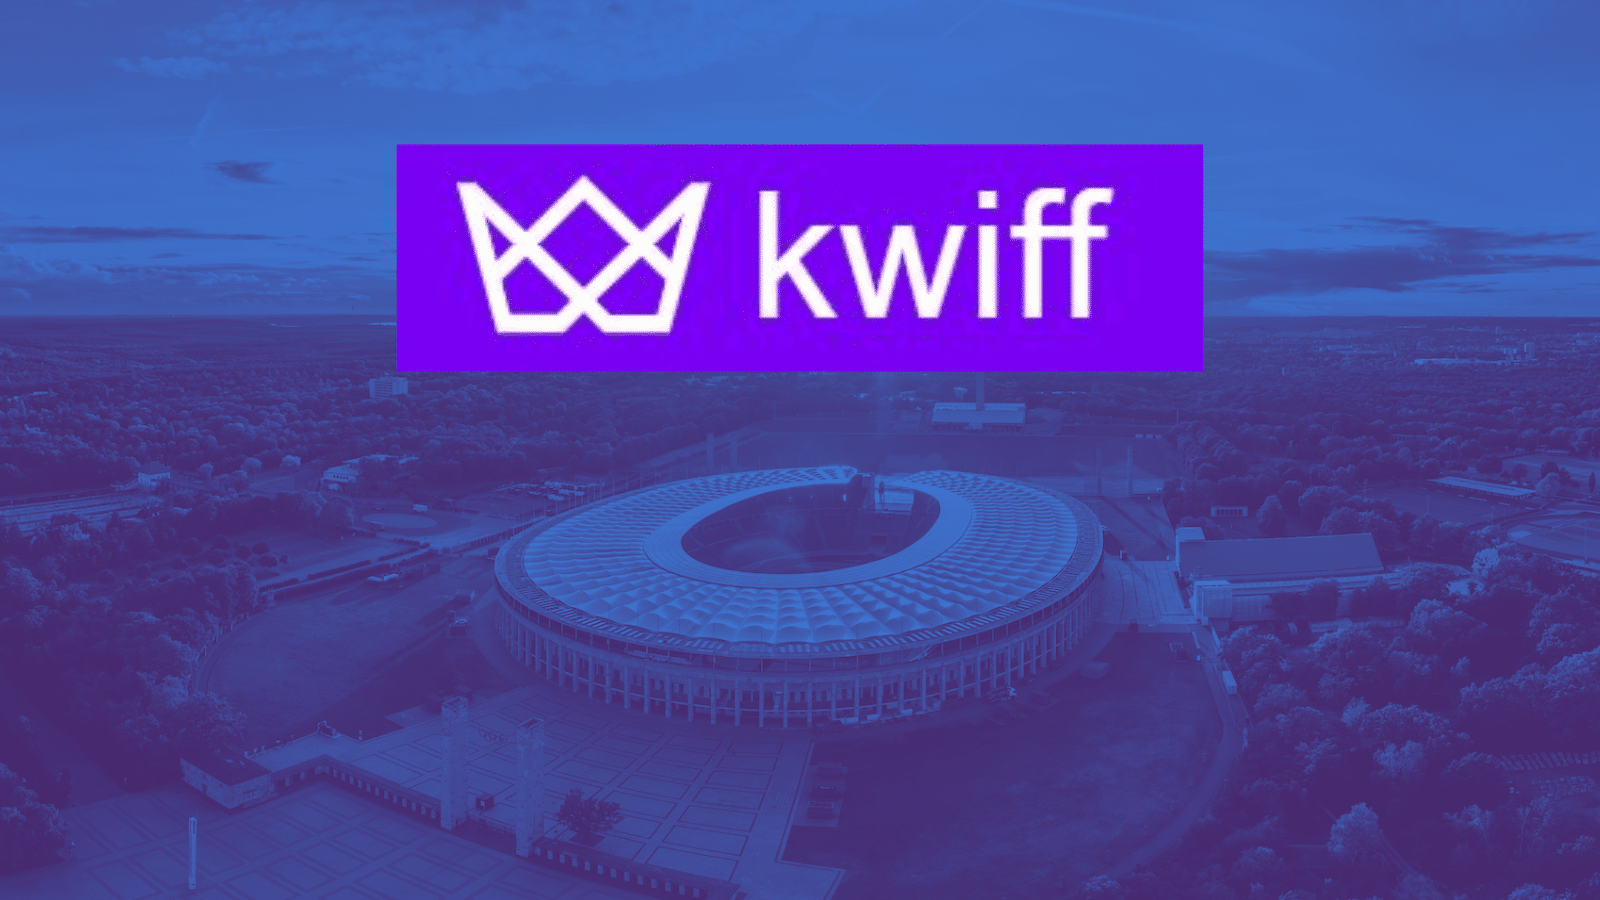 Euros Kwiff sign-up offer